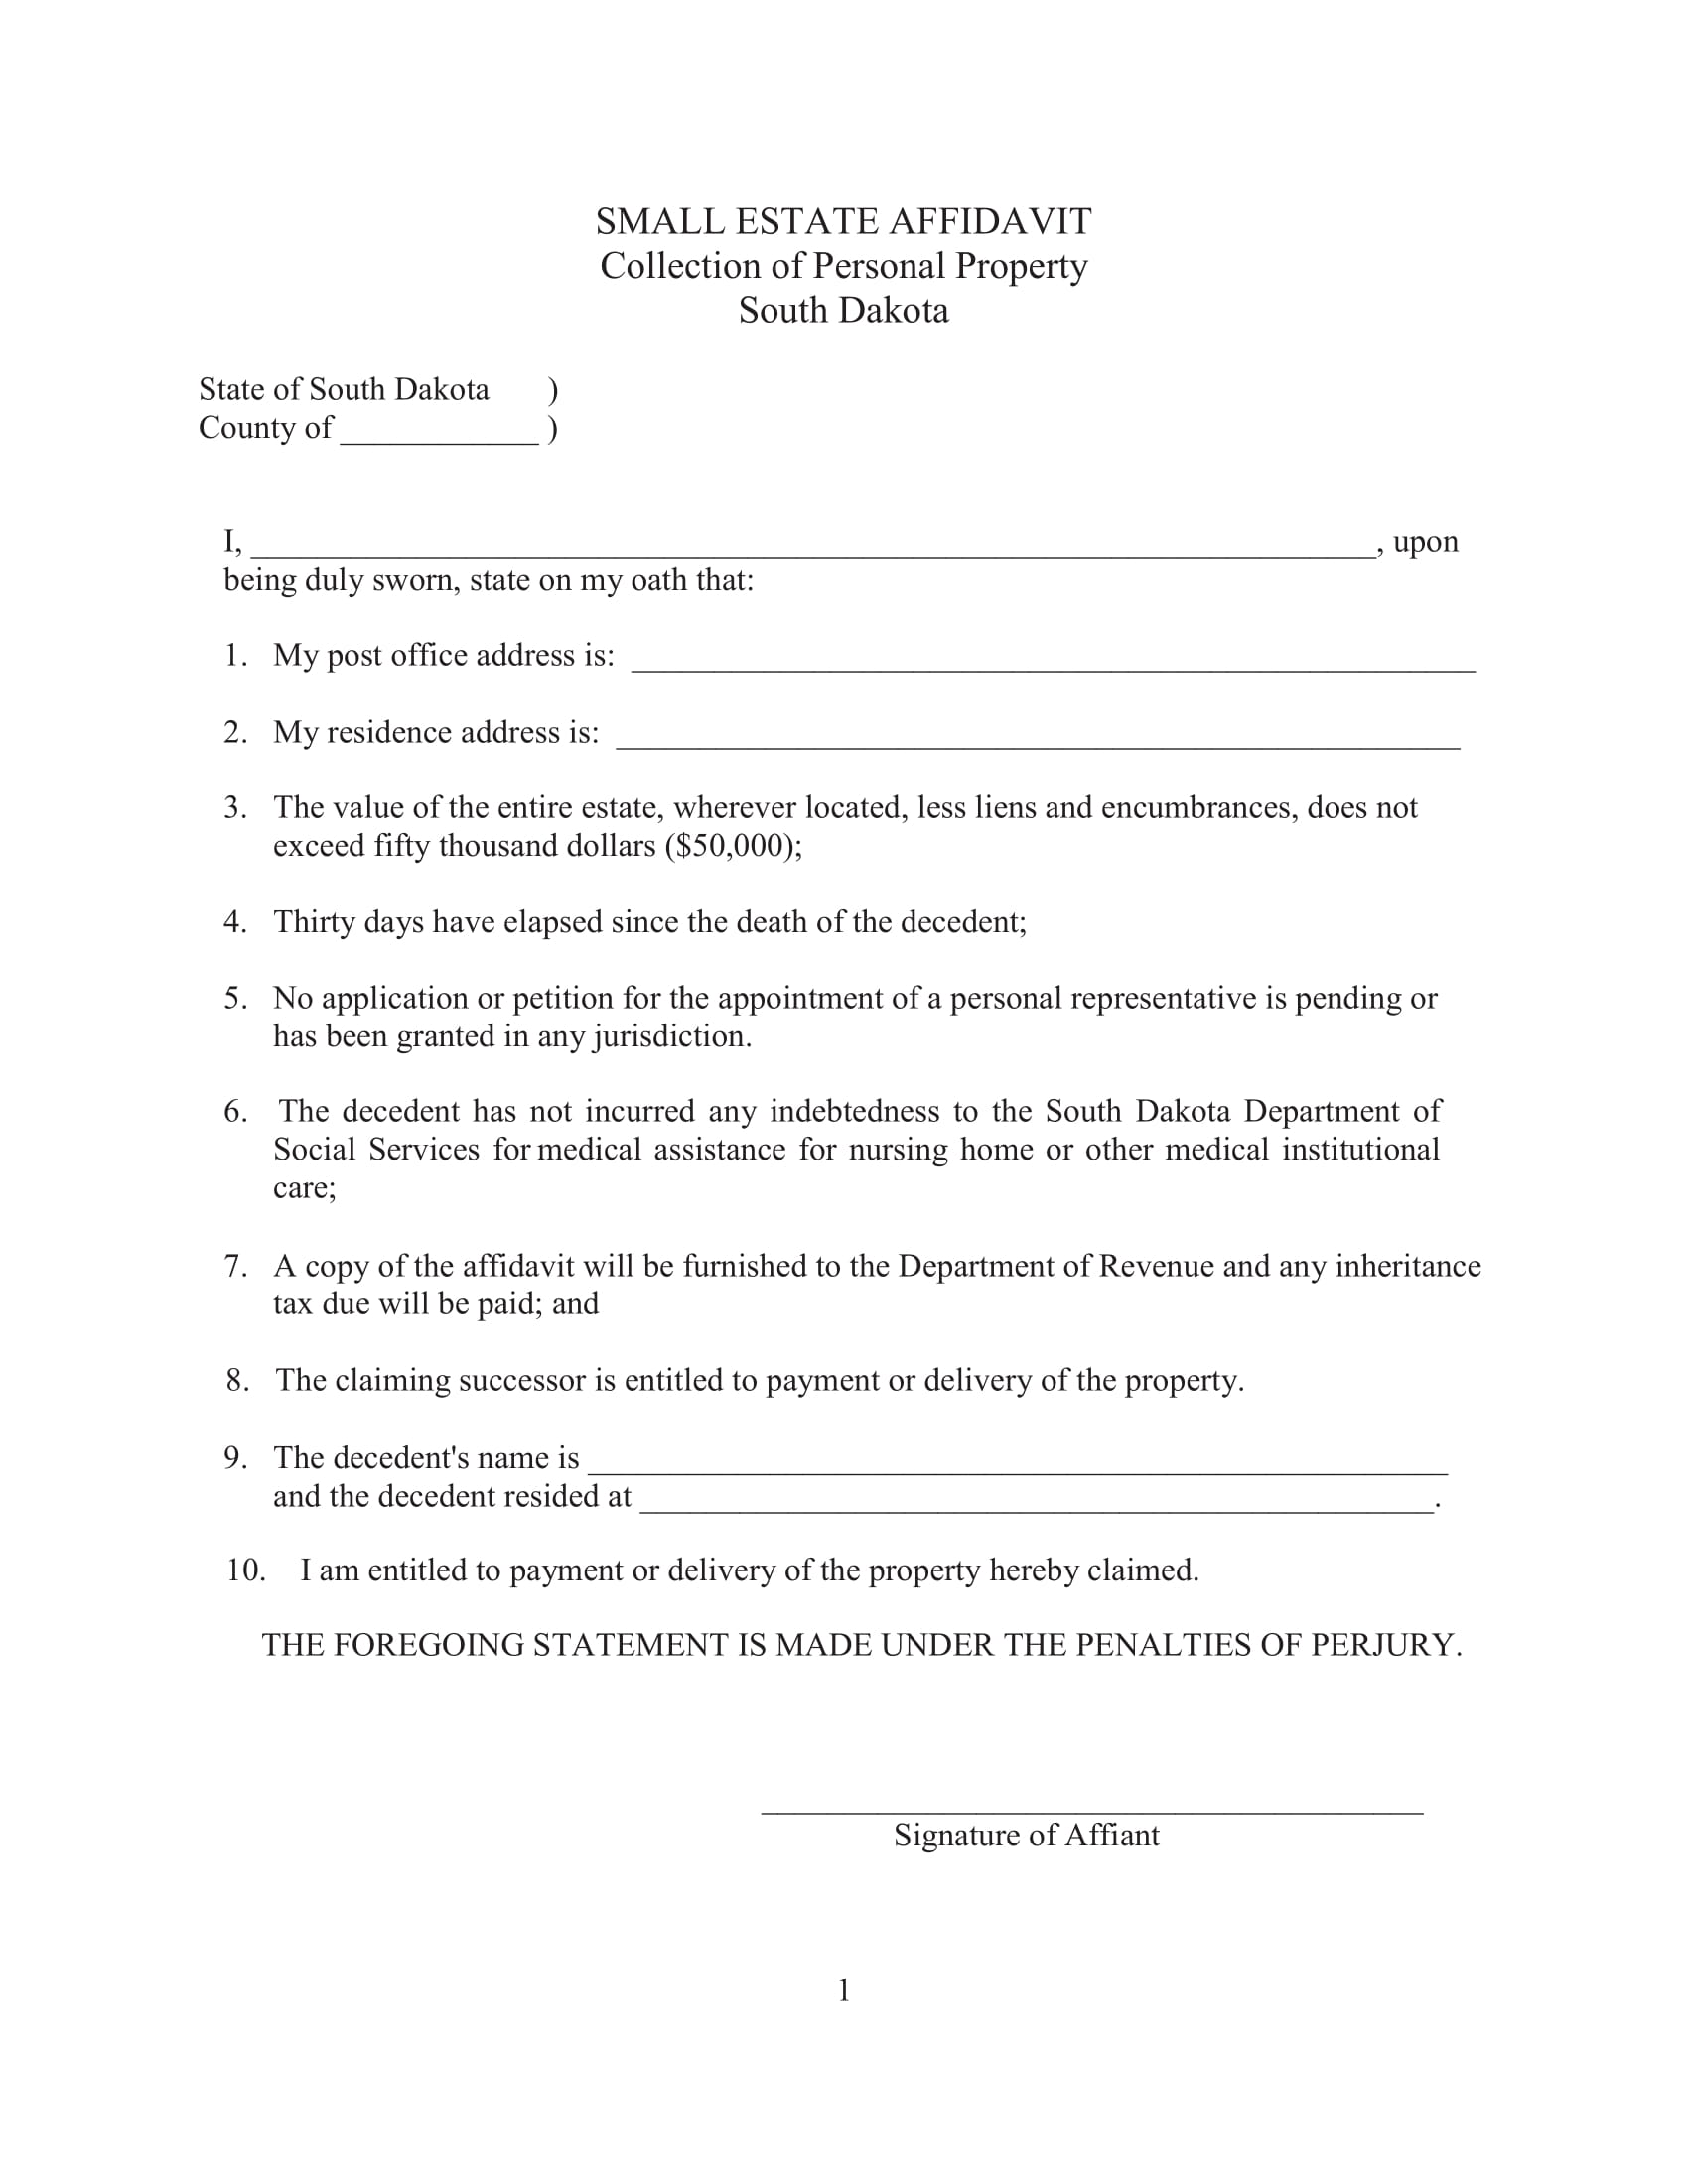 south dakota ase form and instructions